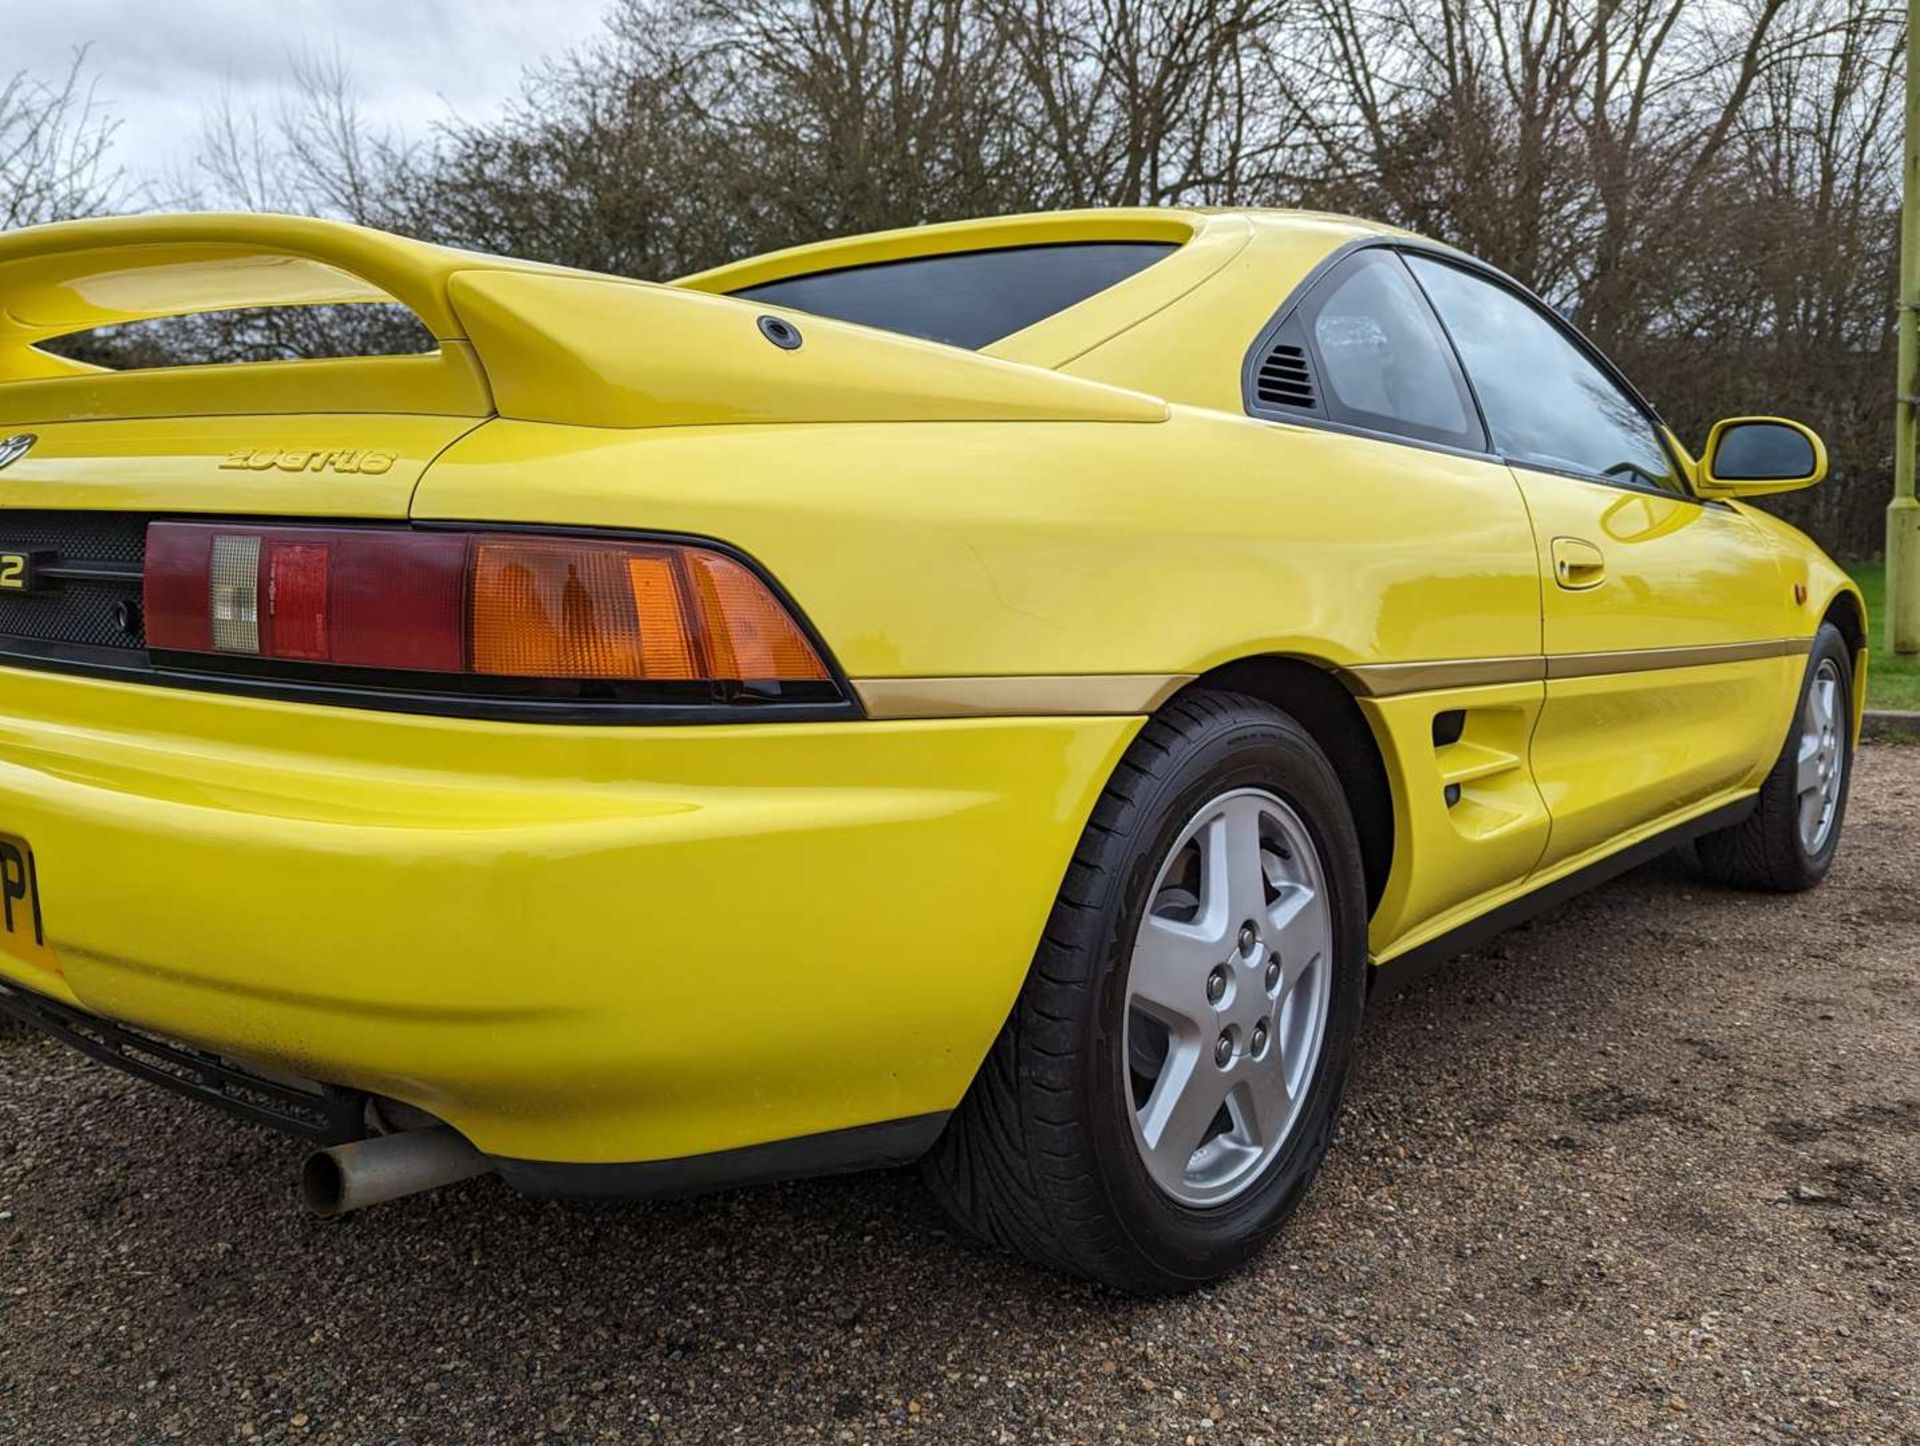 1993 TOYOTA MR2 GT - Image 10 of 29